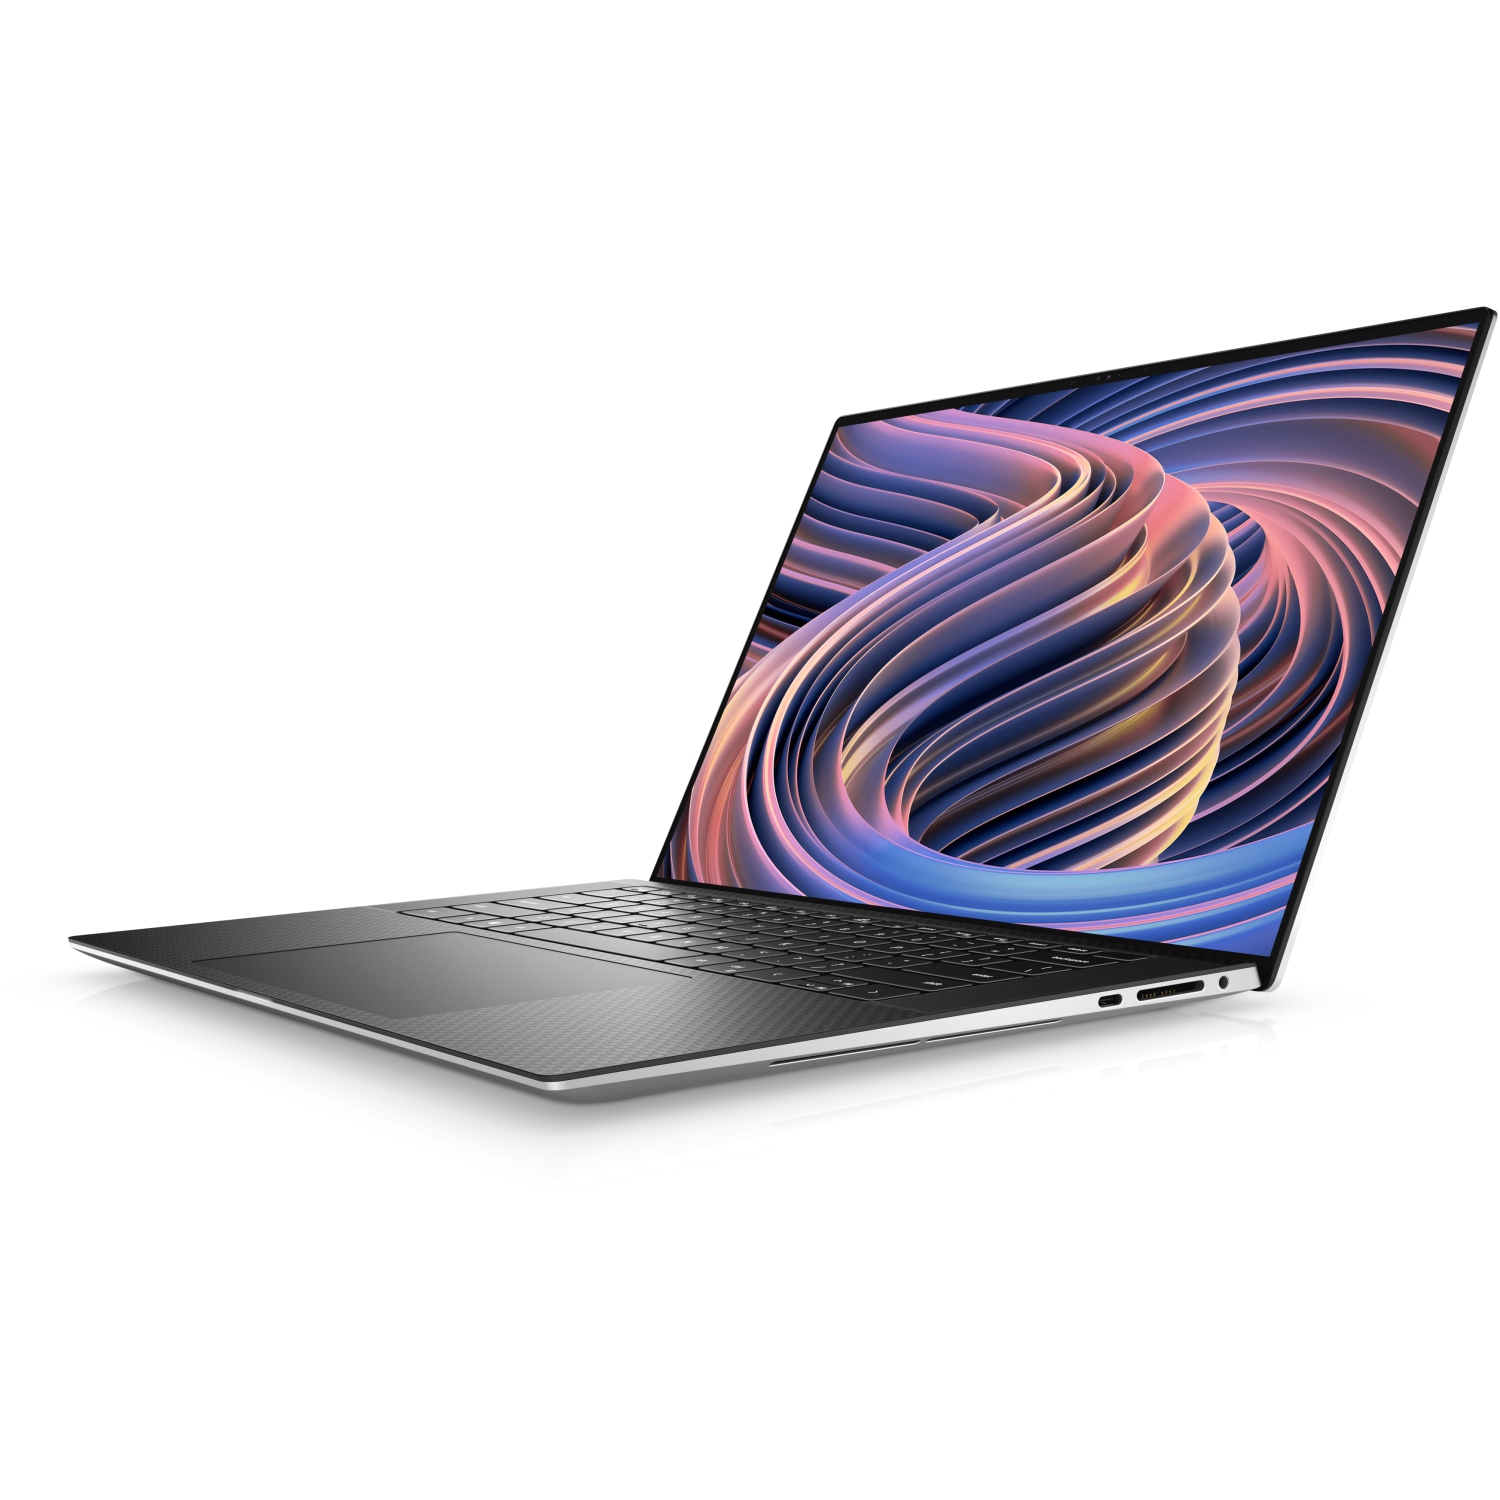 Refurbished (Excellent) – Dell XPS 9520 Laptop (2022) | 15.6" FHD+ | Core i7 - 1TB SSD - 32GB RAM - RTX 3050 | 14 Cores @ 4.7 GHz - 12th Gen CPU